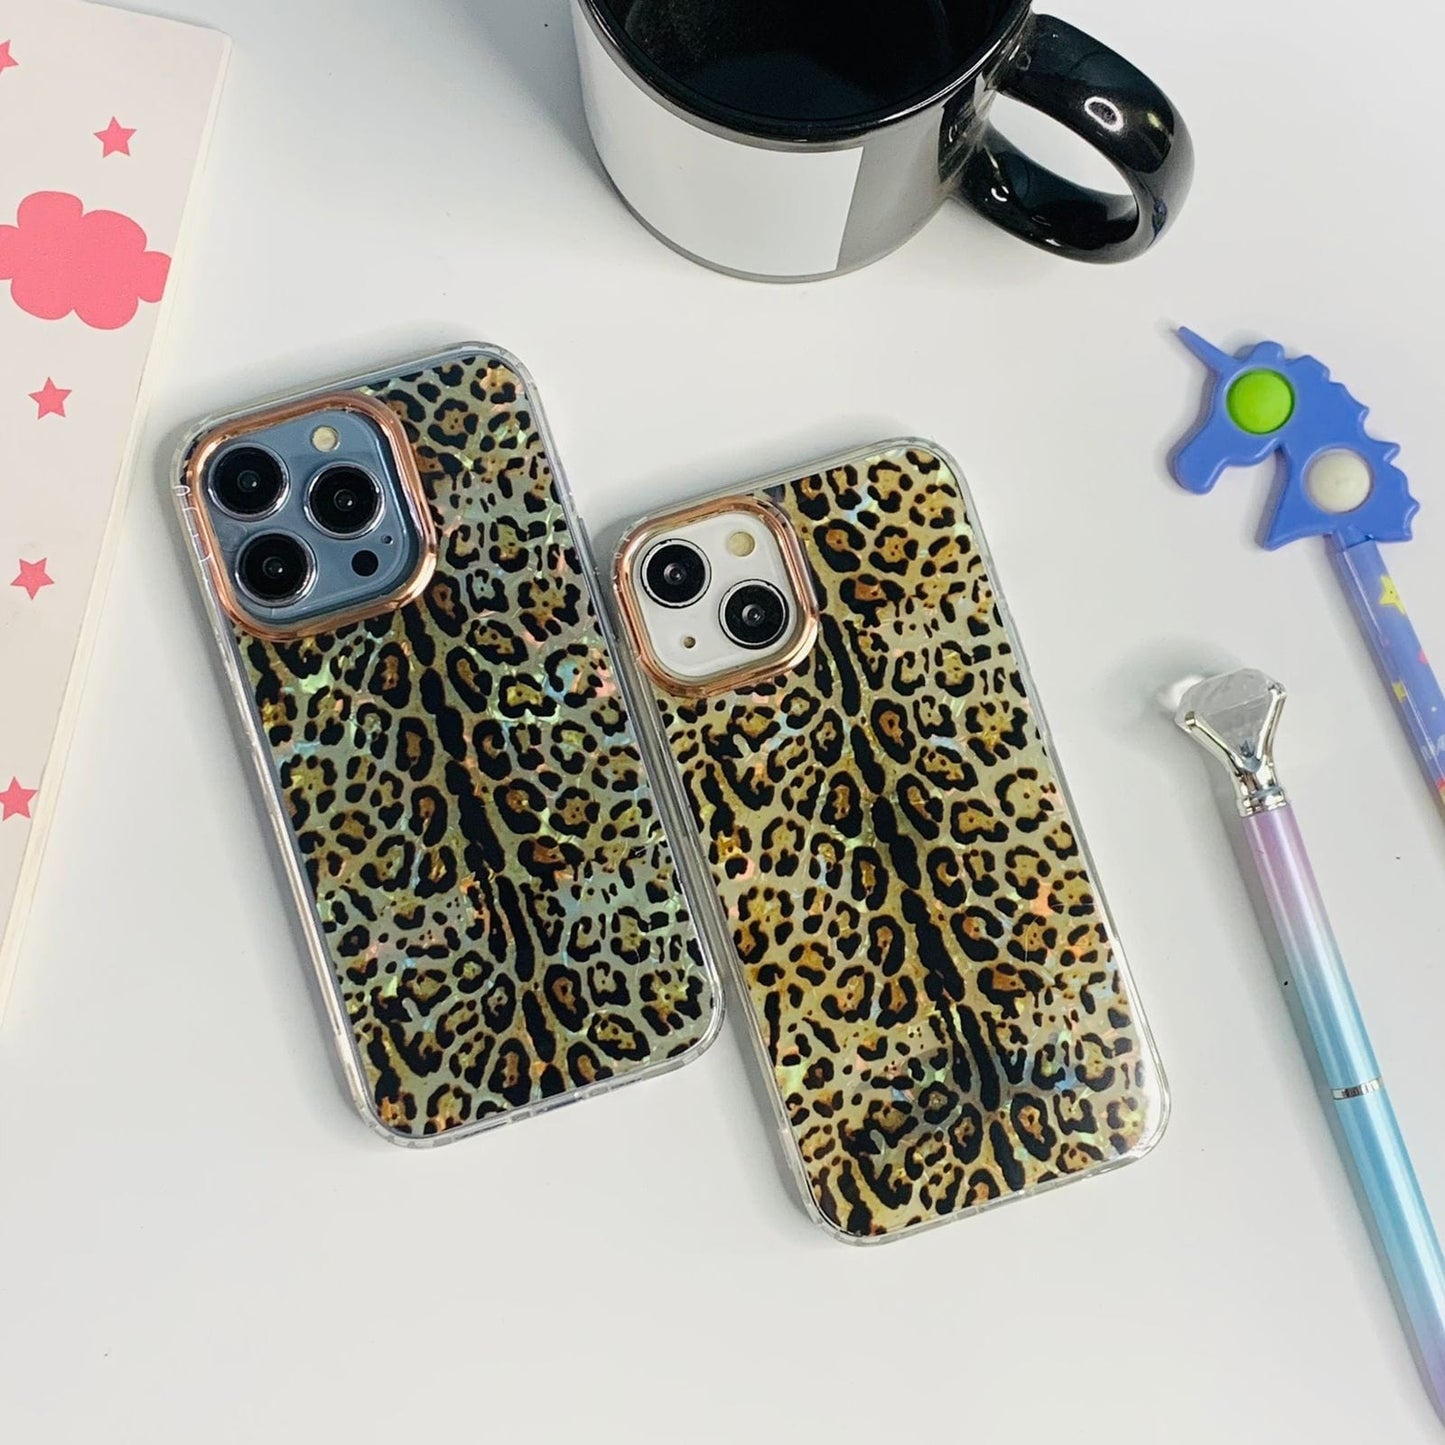 Cheetah Printed Textured Case for Iphones